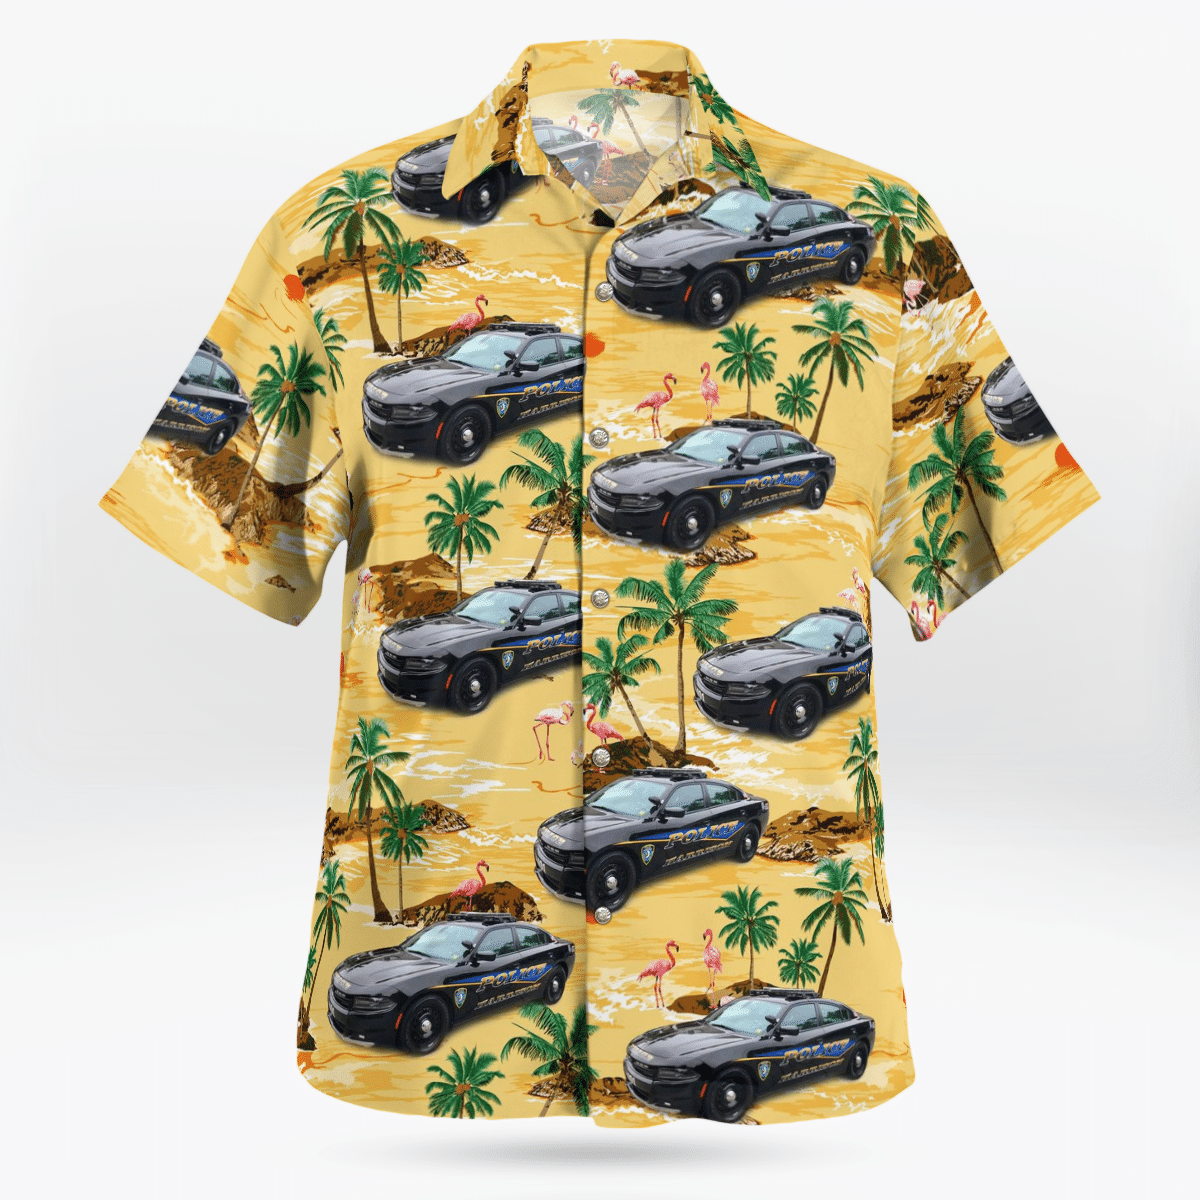 Hawaiian shirts never go out of style 88